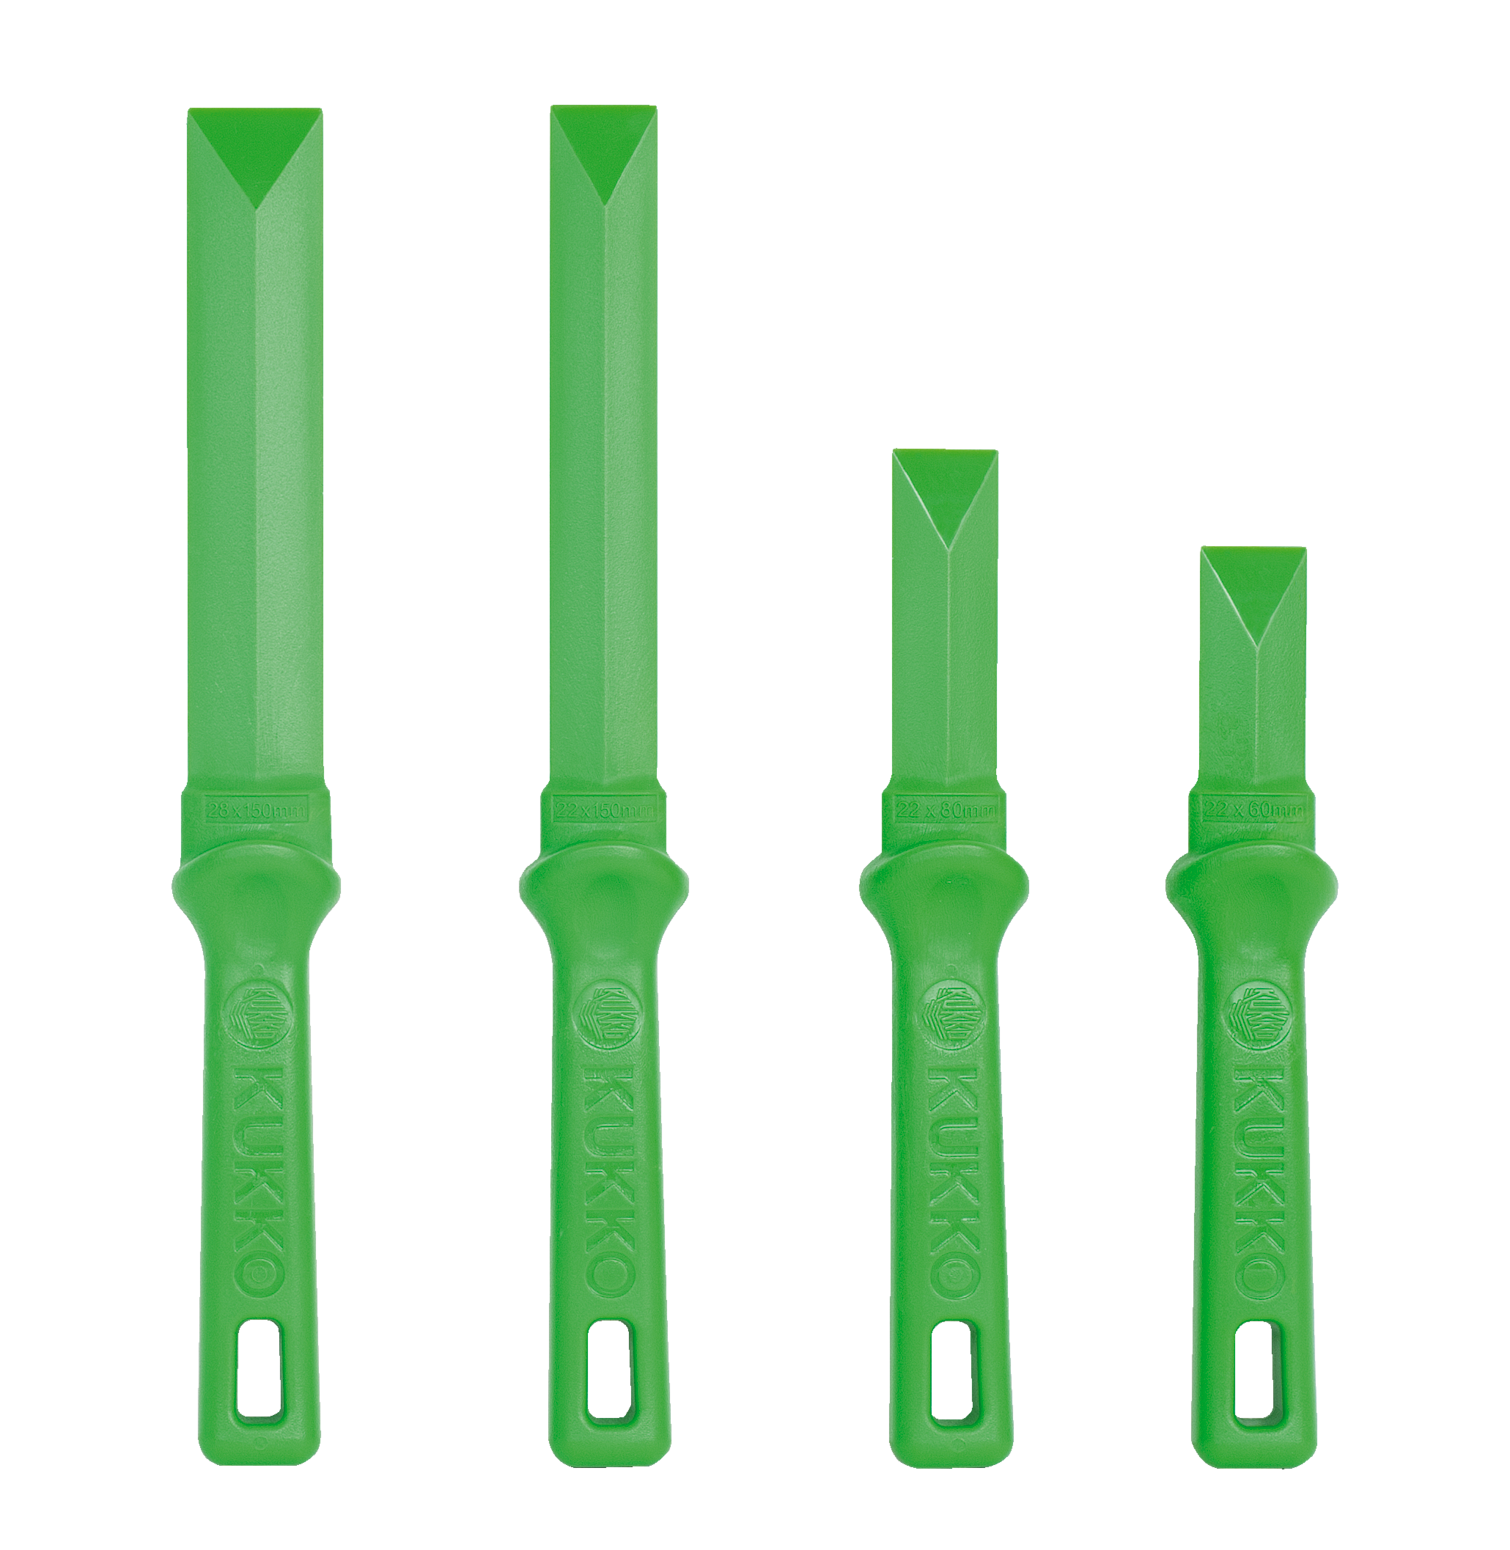 The Soft Scraper Set 2200 for gentle removal of residues and plaques